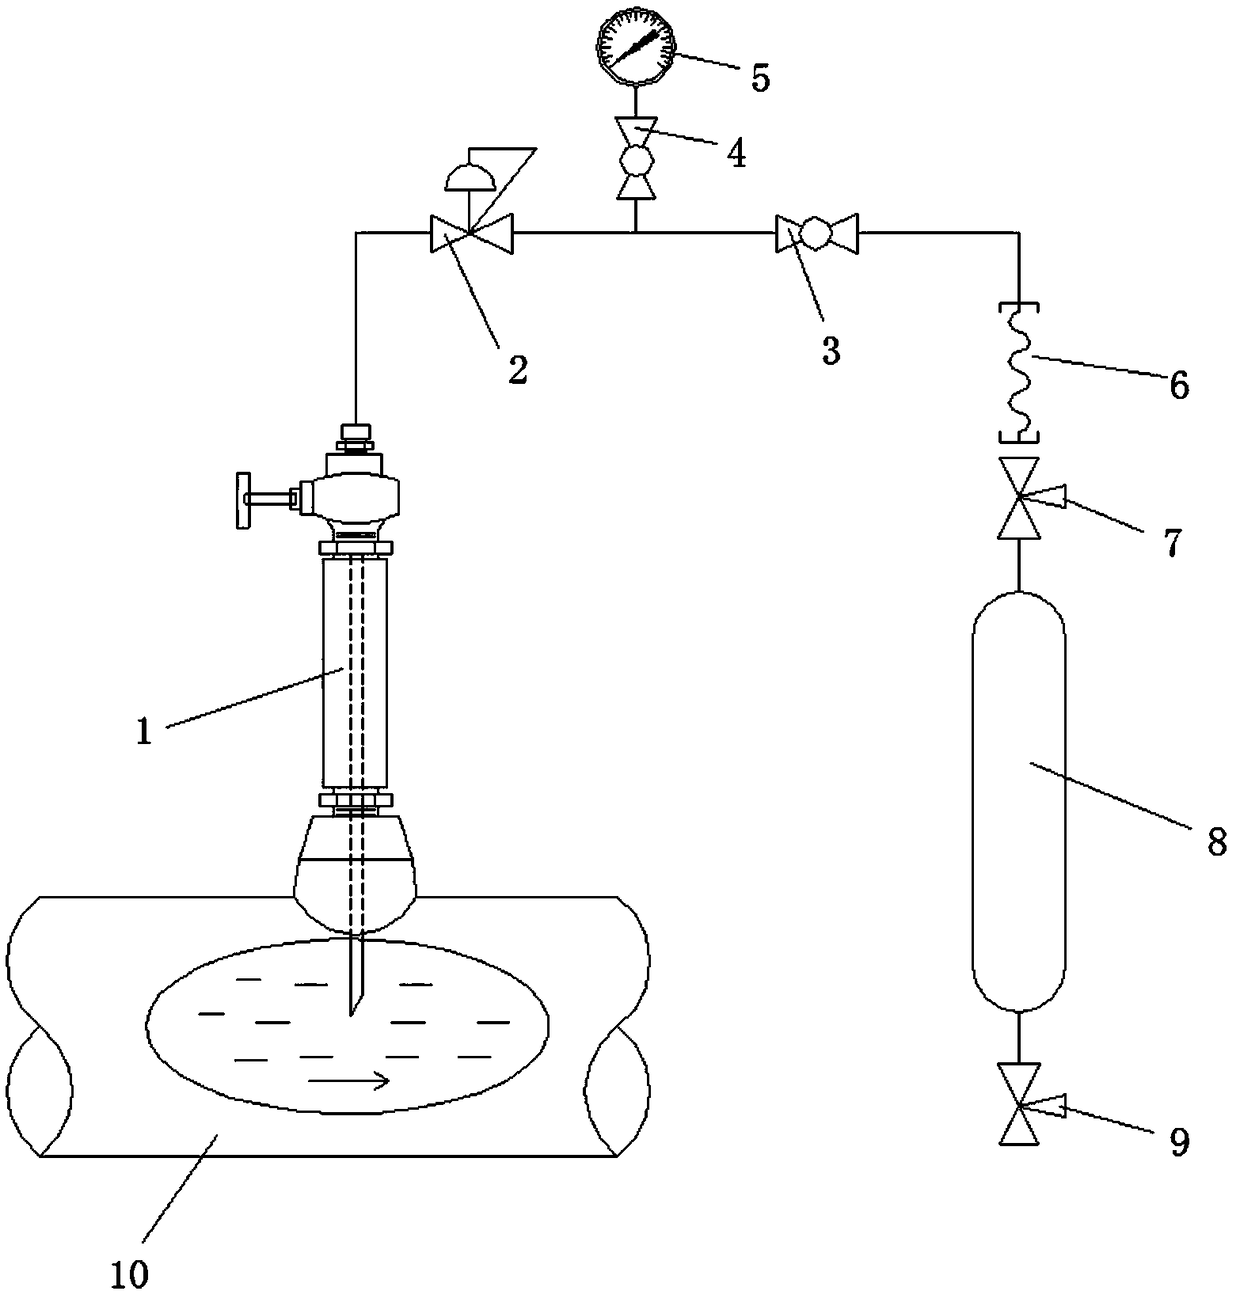 Automatic natural gas continuous-sampling control system